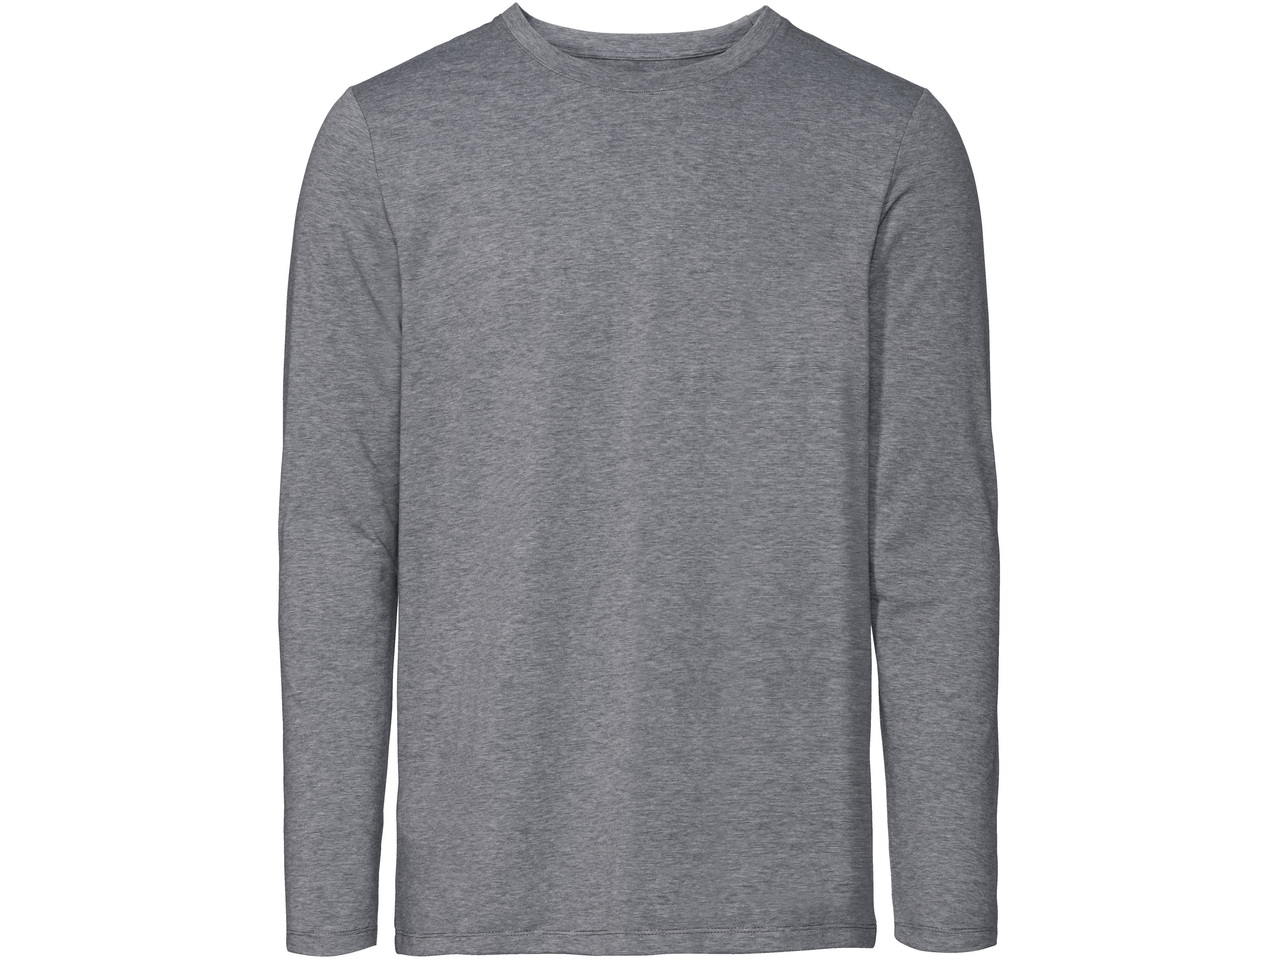 LIVERGY Mens' Thermal Long-Sleeve Top